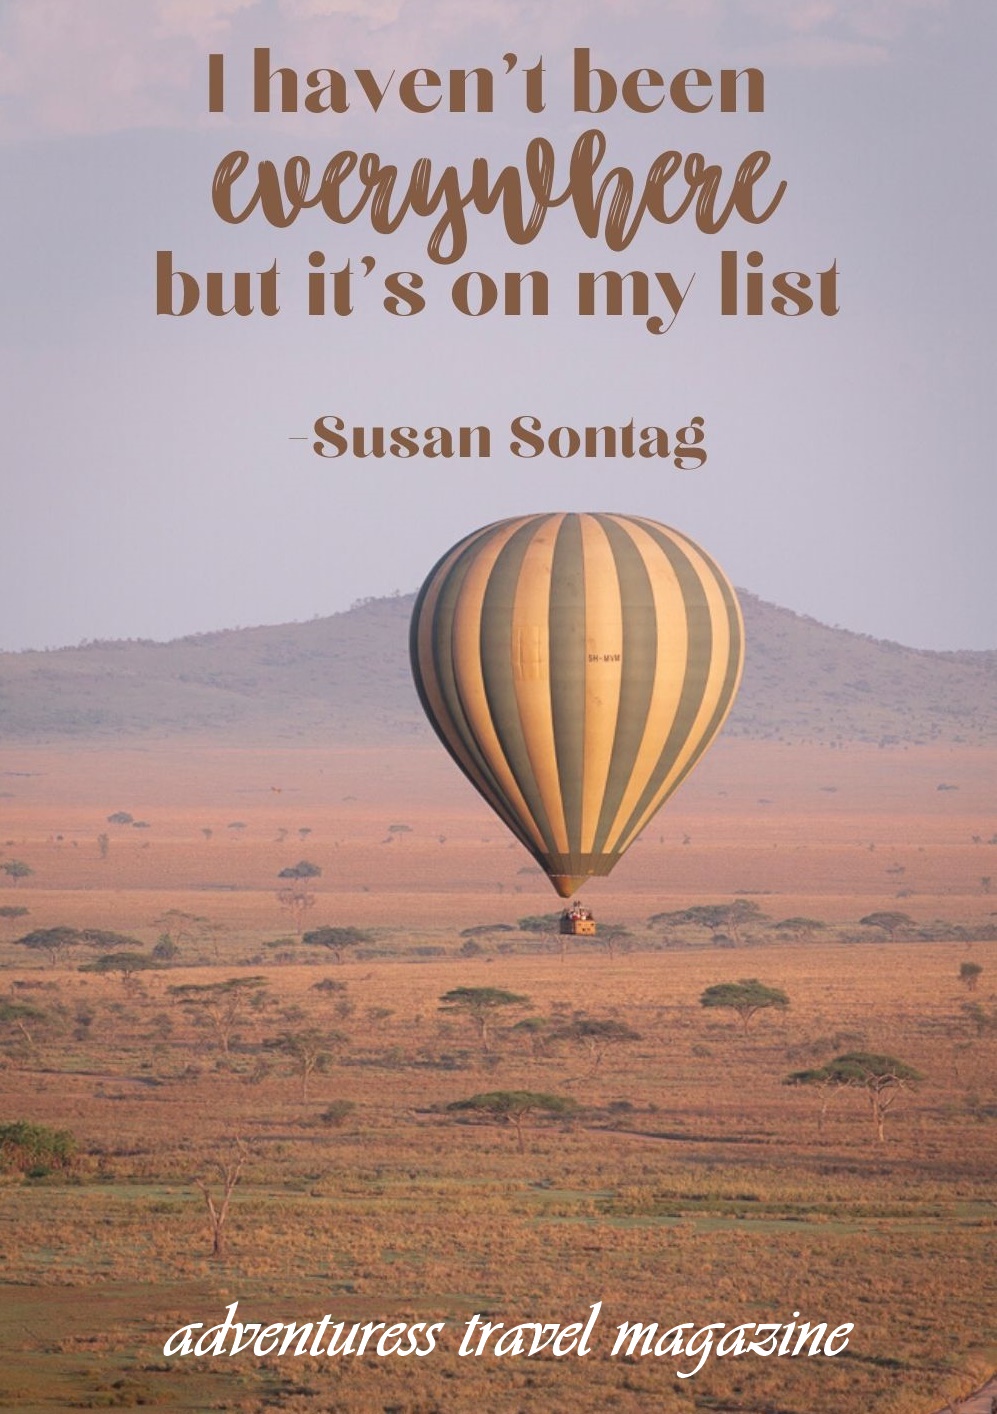 I have not been everywhere but it is on my list quote - hot air balloon flying over landscape